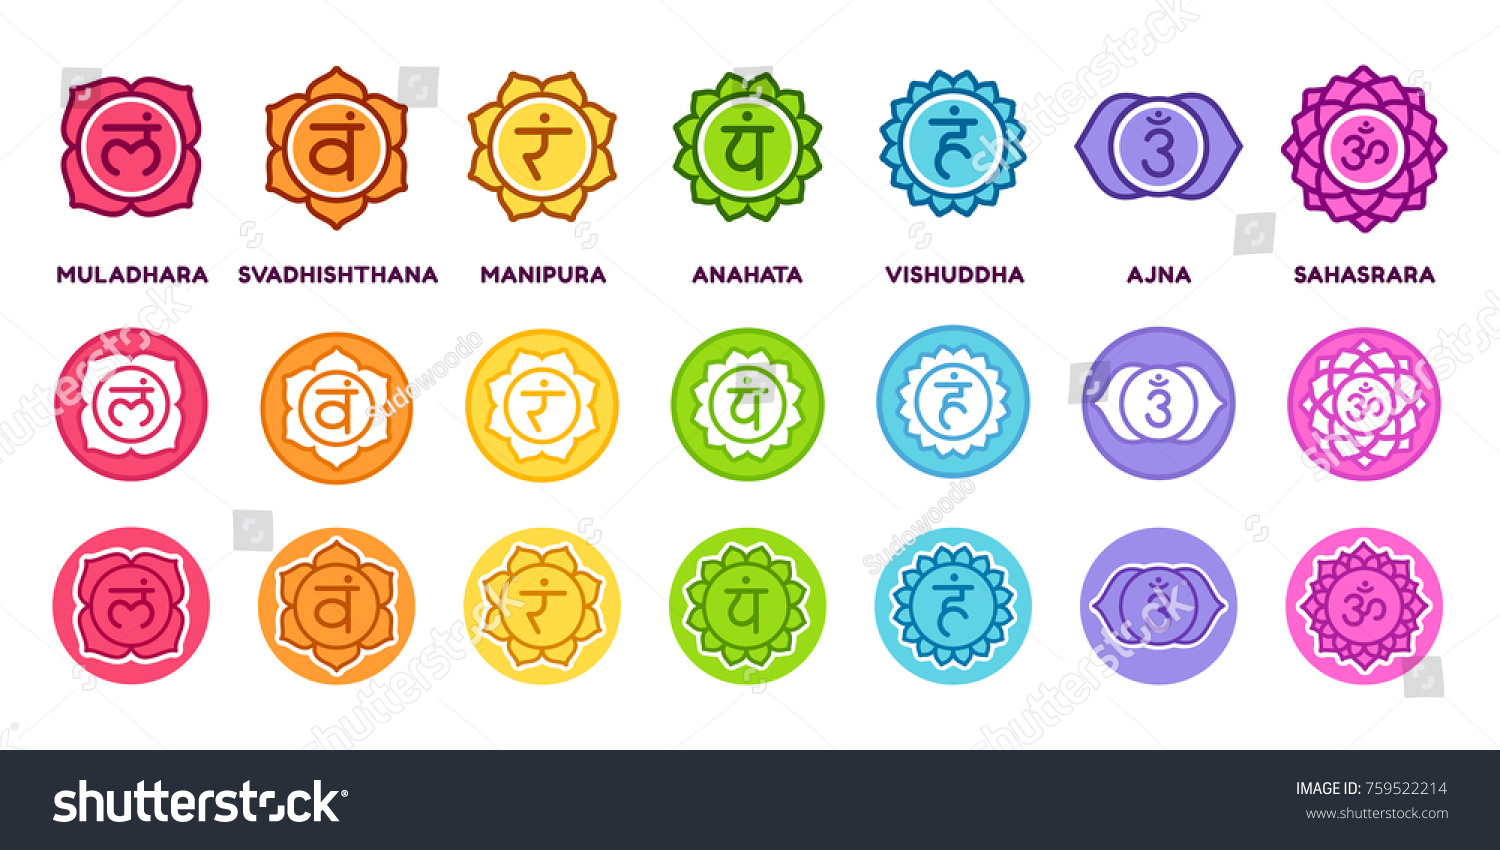 Chakra System Icon Set Different Styles Stock Vector (Royalty Free ...